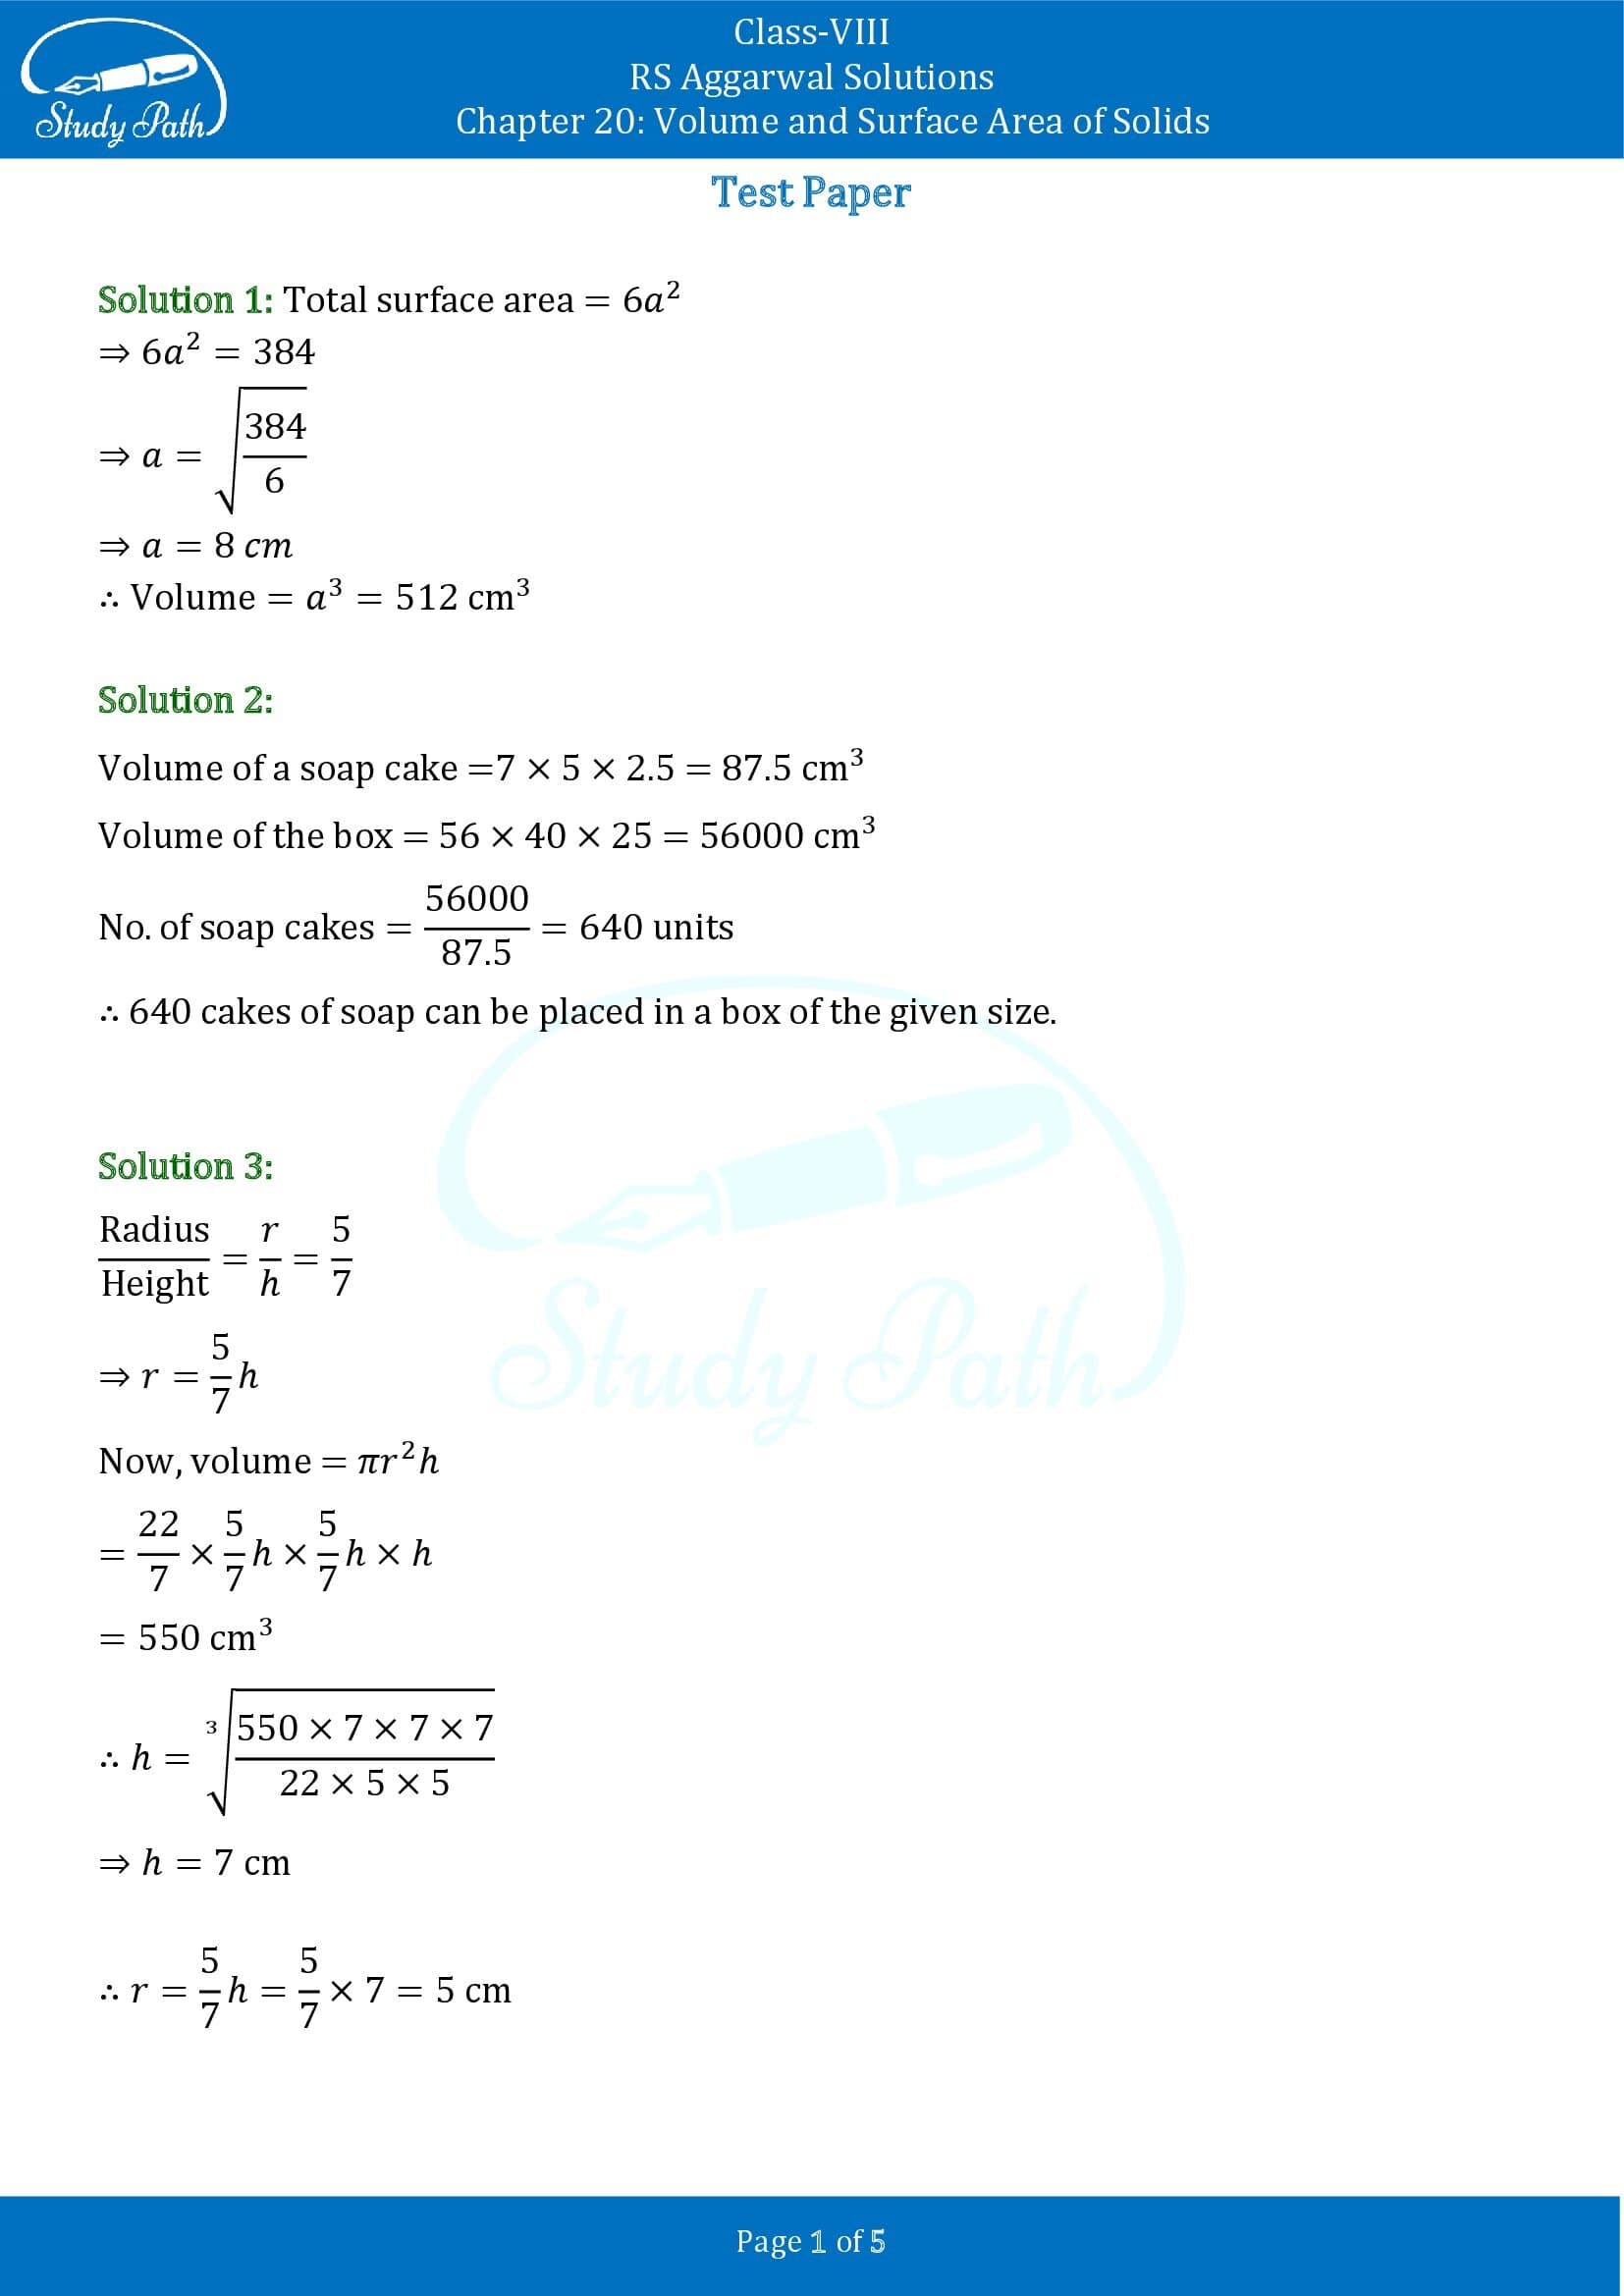 RS Aggarwal Solutions Class 8 Chapter 20 Volume and Surface Area of Solids Test Paper 00001